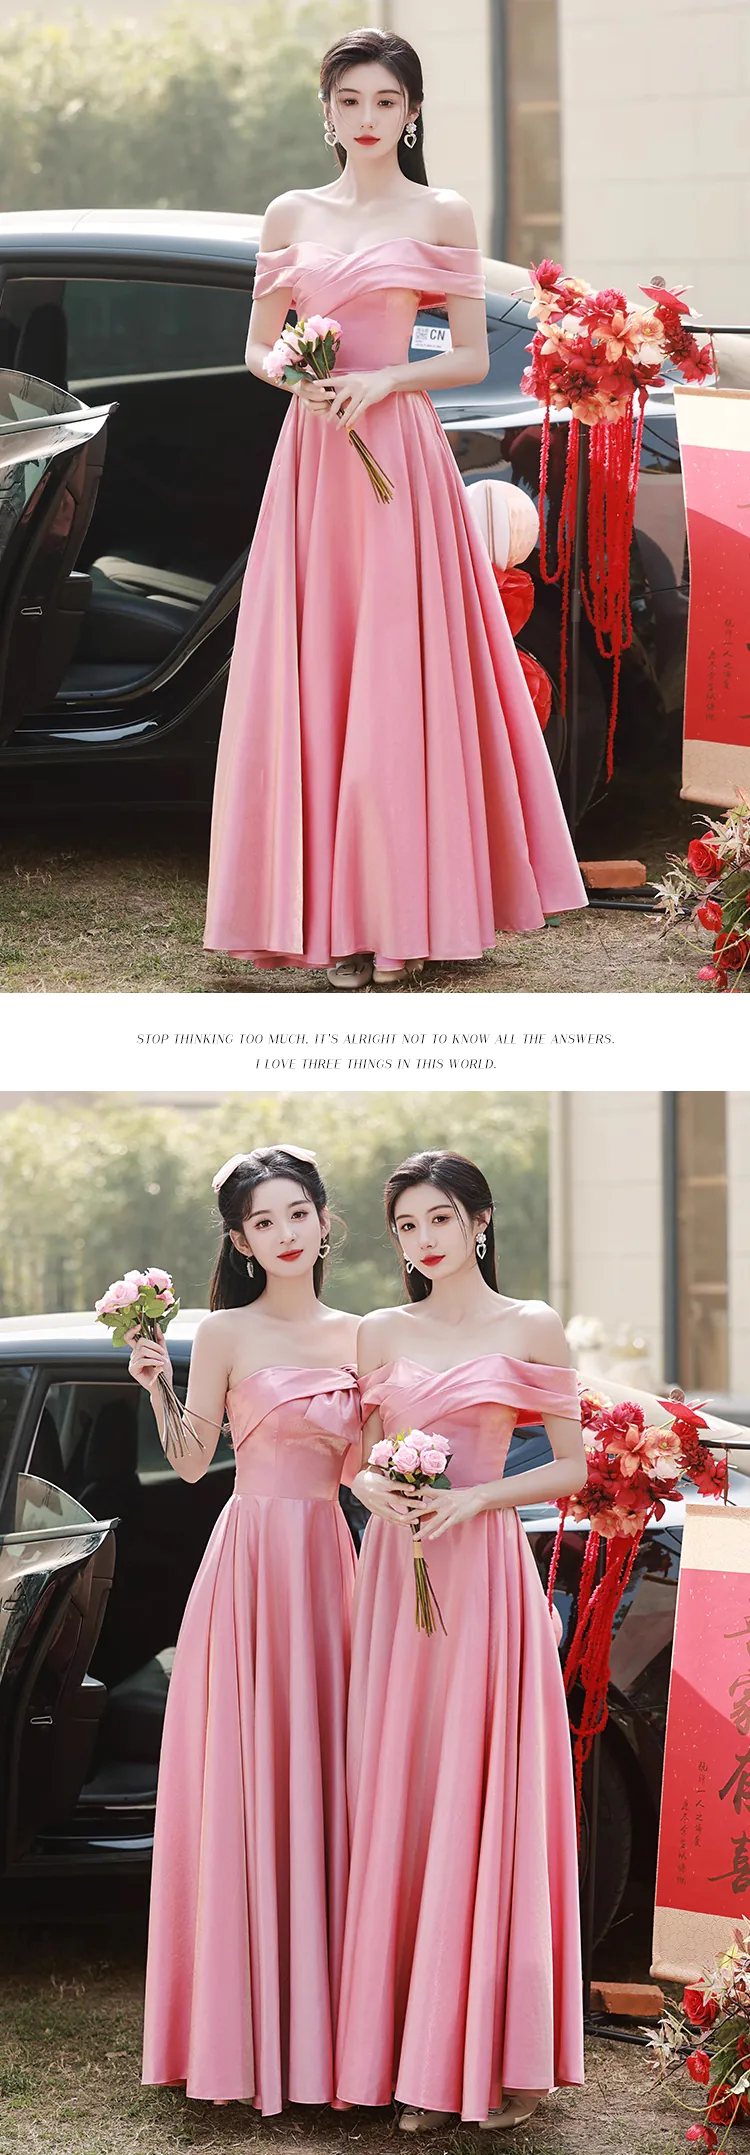 Charming-Pink-Satin-Bridesmaid-Dress-Short-Sleeve-Prom-Evening-Gown26